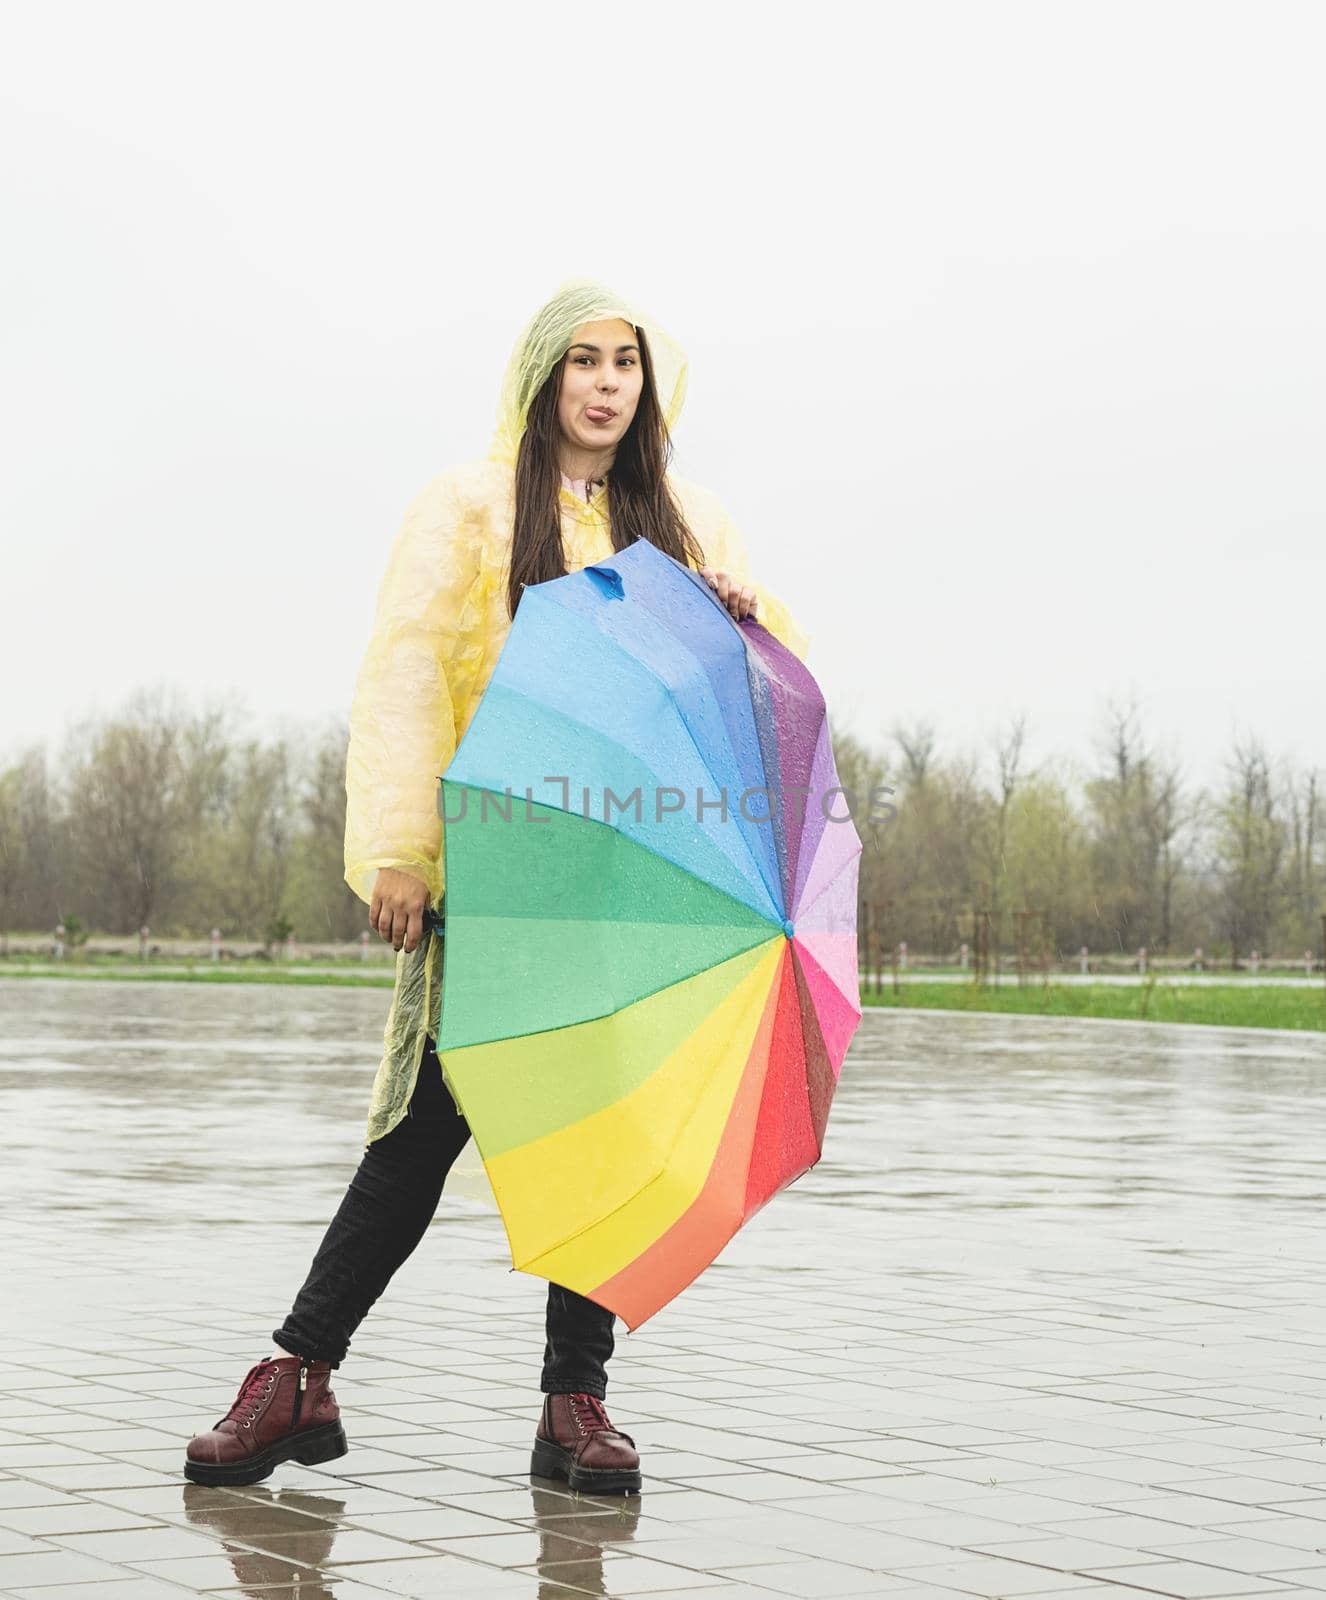 Beautiful brunette woman in yellow raincoat holding rainbow umbrella out in the rain, making funny face showing tongue out